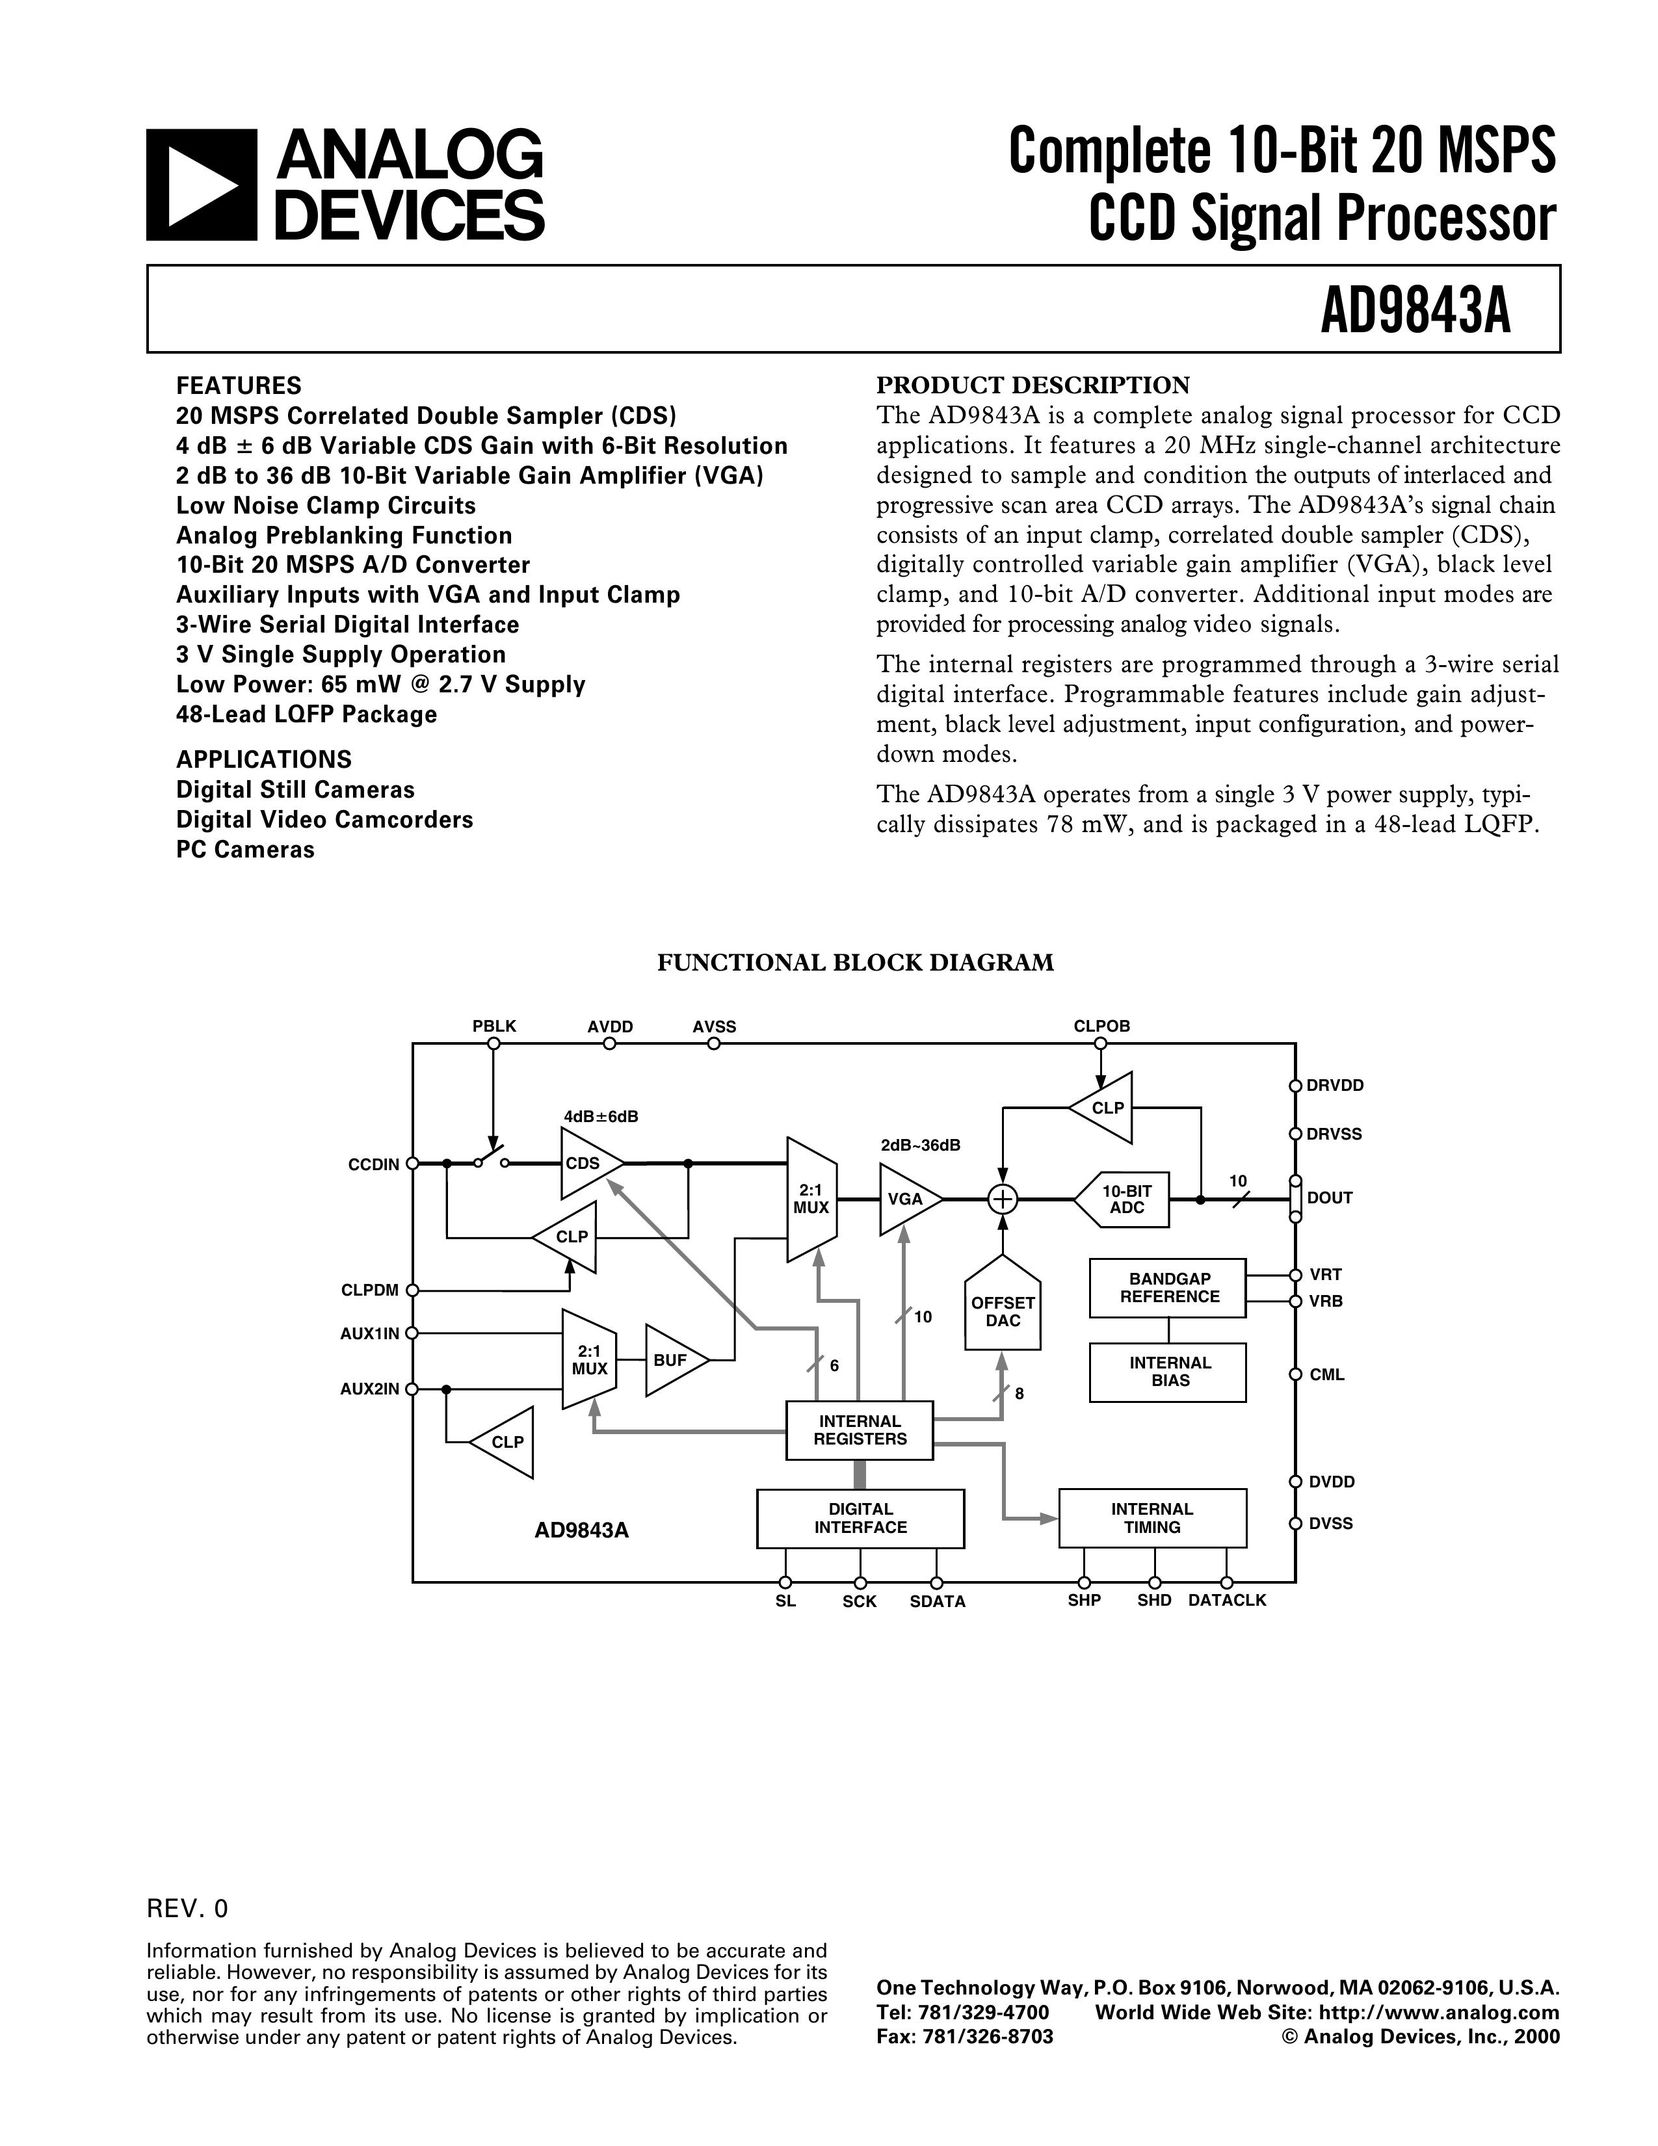 Analog Devices AD9843A Microwave Oven User Manual